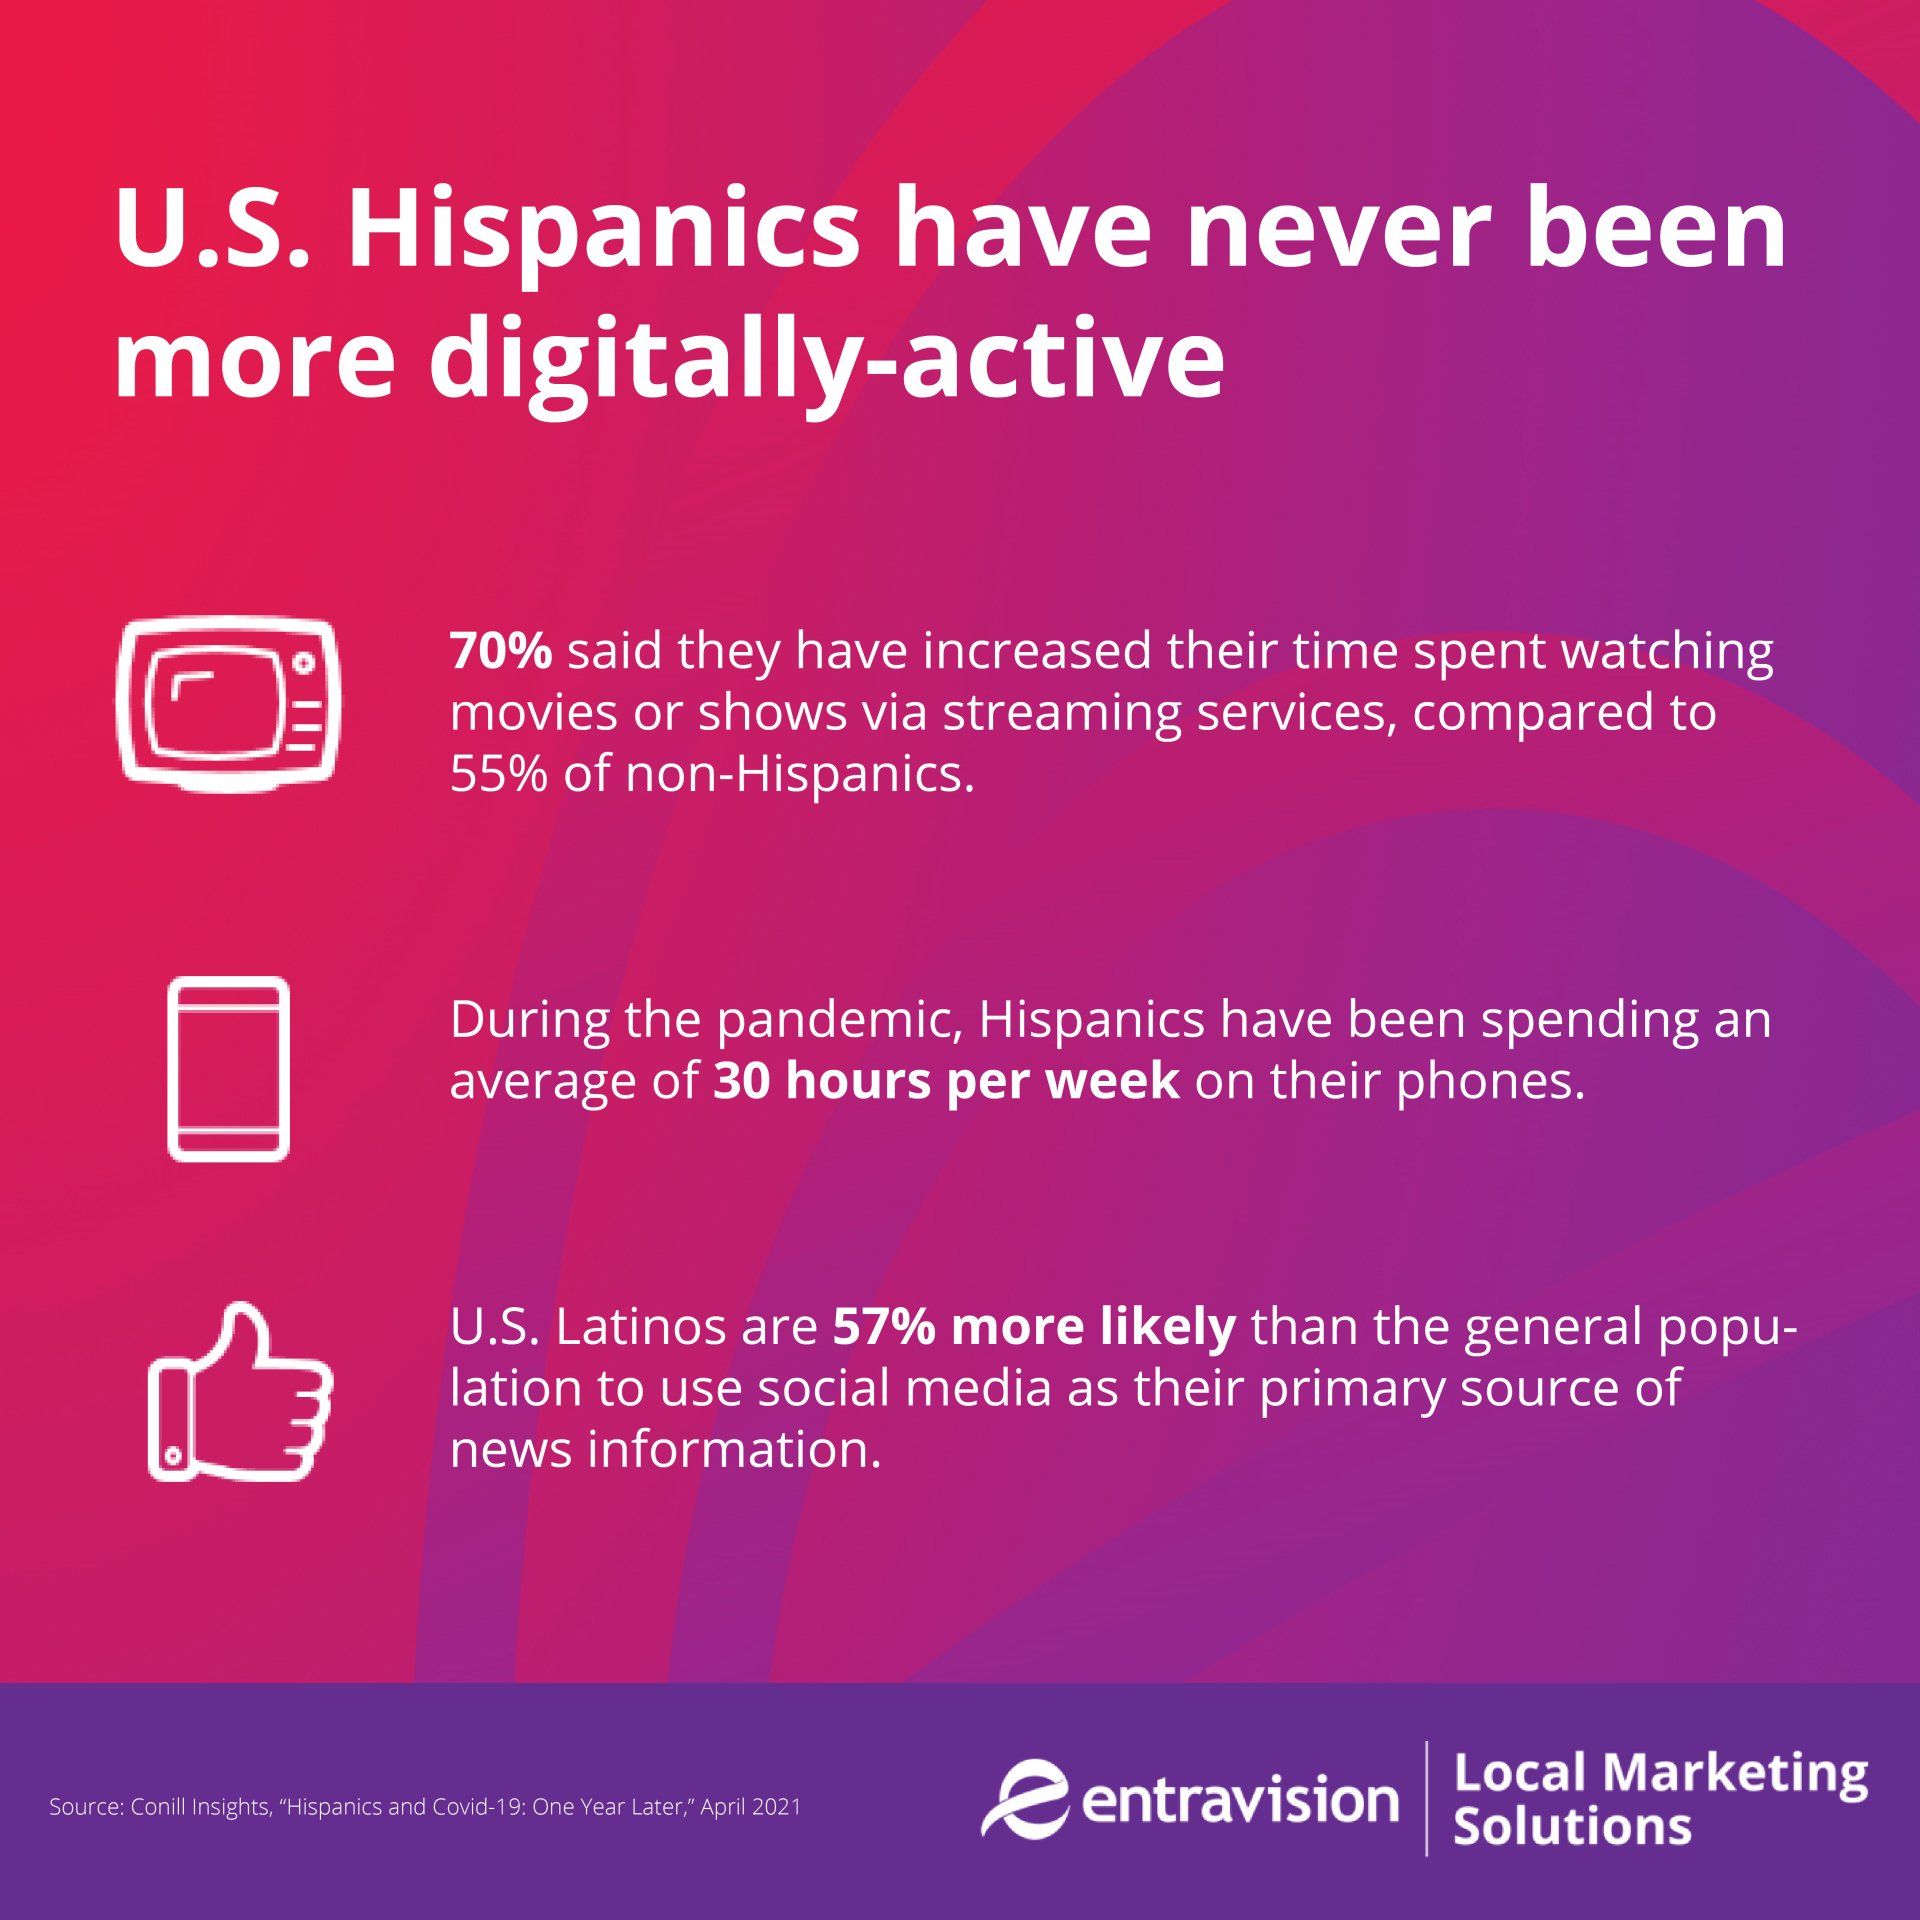 U.S. Hispanics are the ideal digital marketing audience, and their  digital usage rates outpace the general population. Learn how our Los Angeles digital marketing agency can help your business reach its goals!